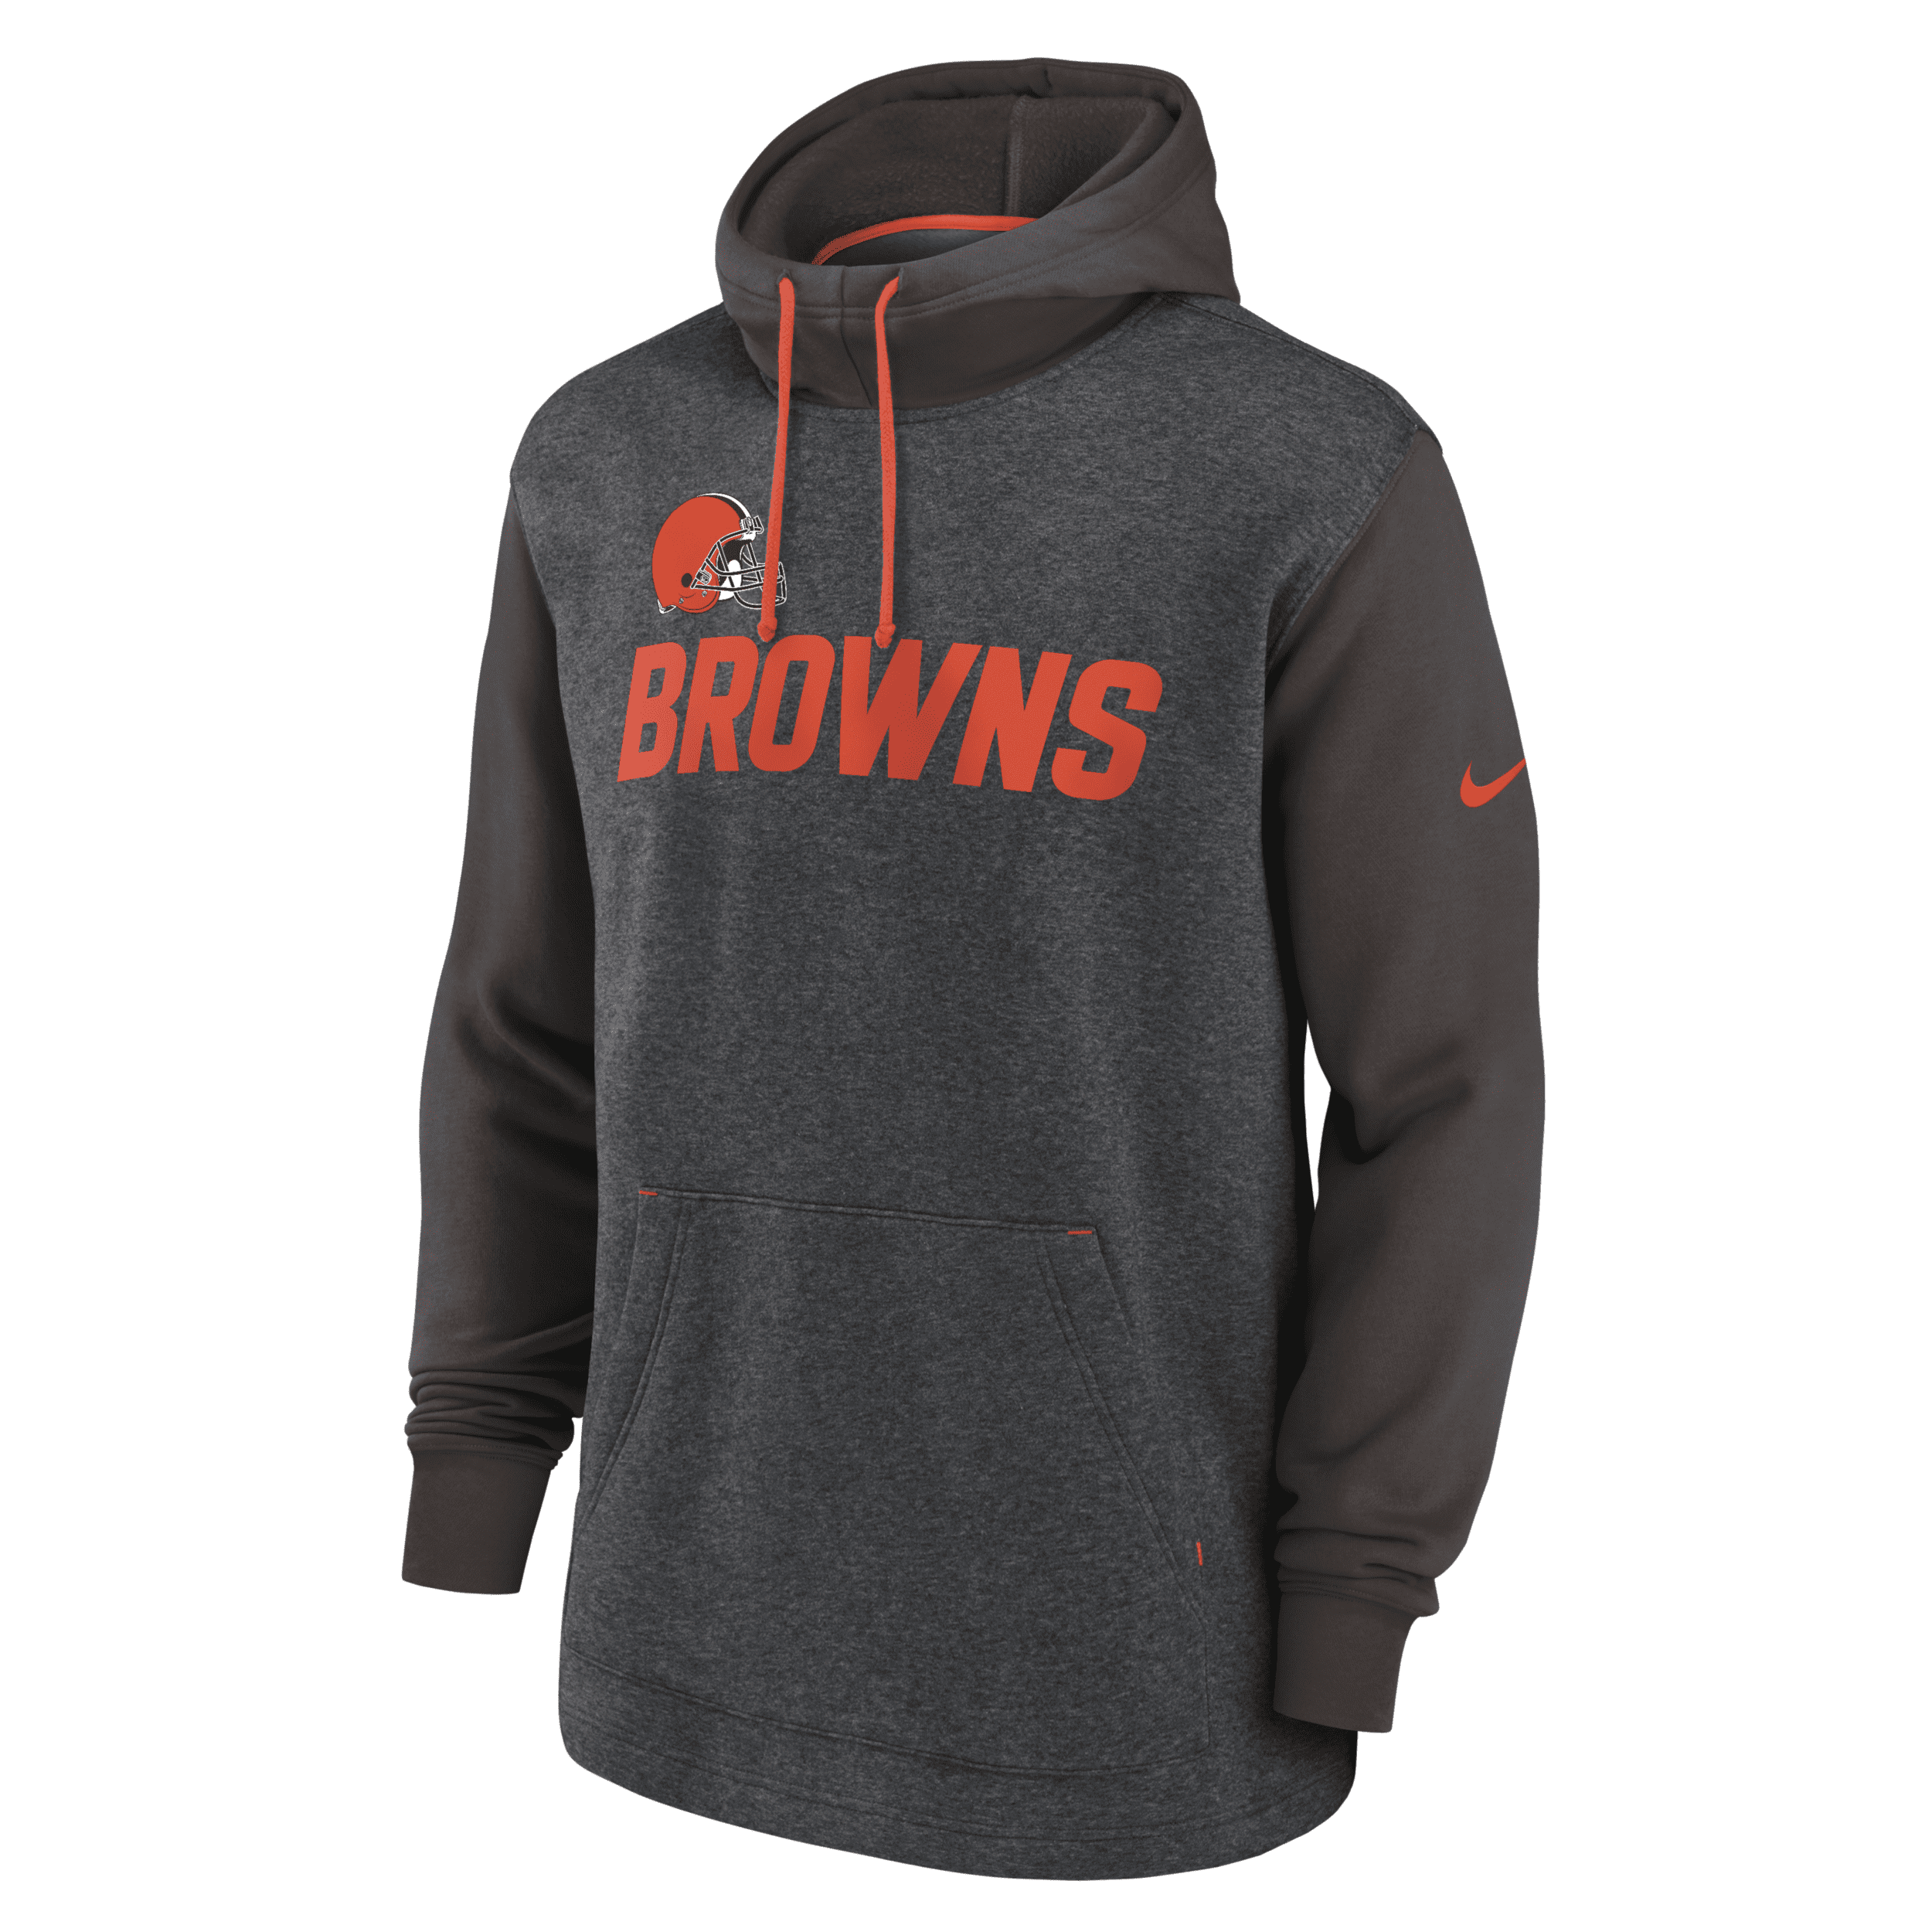 Nike Surrey Legacy (NFL Cleveland Browns) Men's Pullover Hoodie